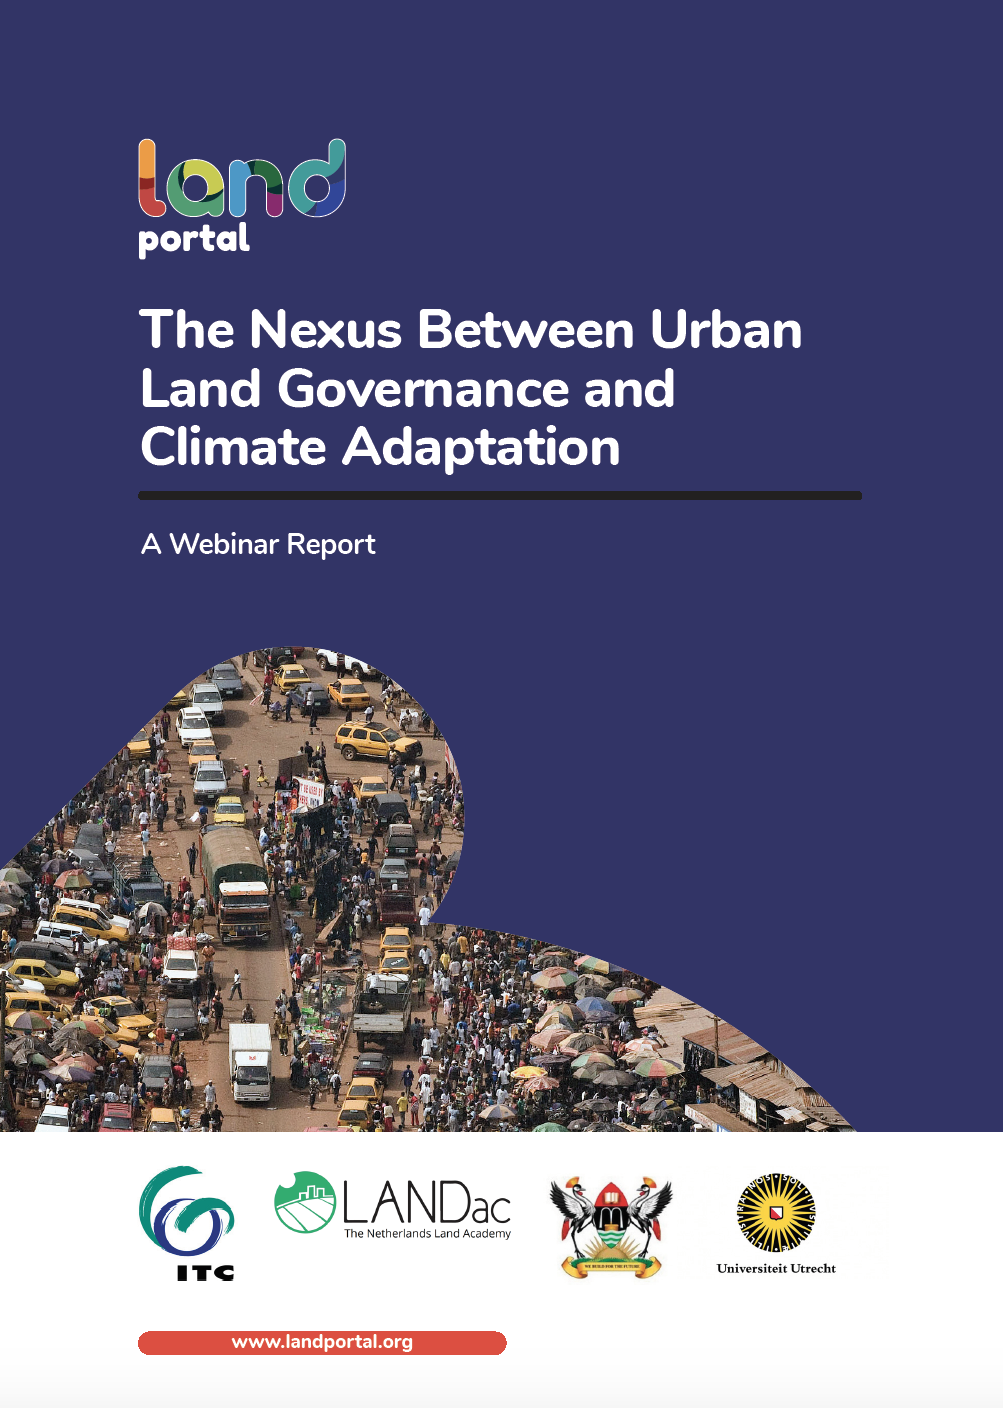 The Nexus Between Urban Land Governance and Climate Adaptation